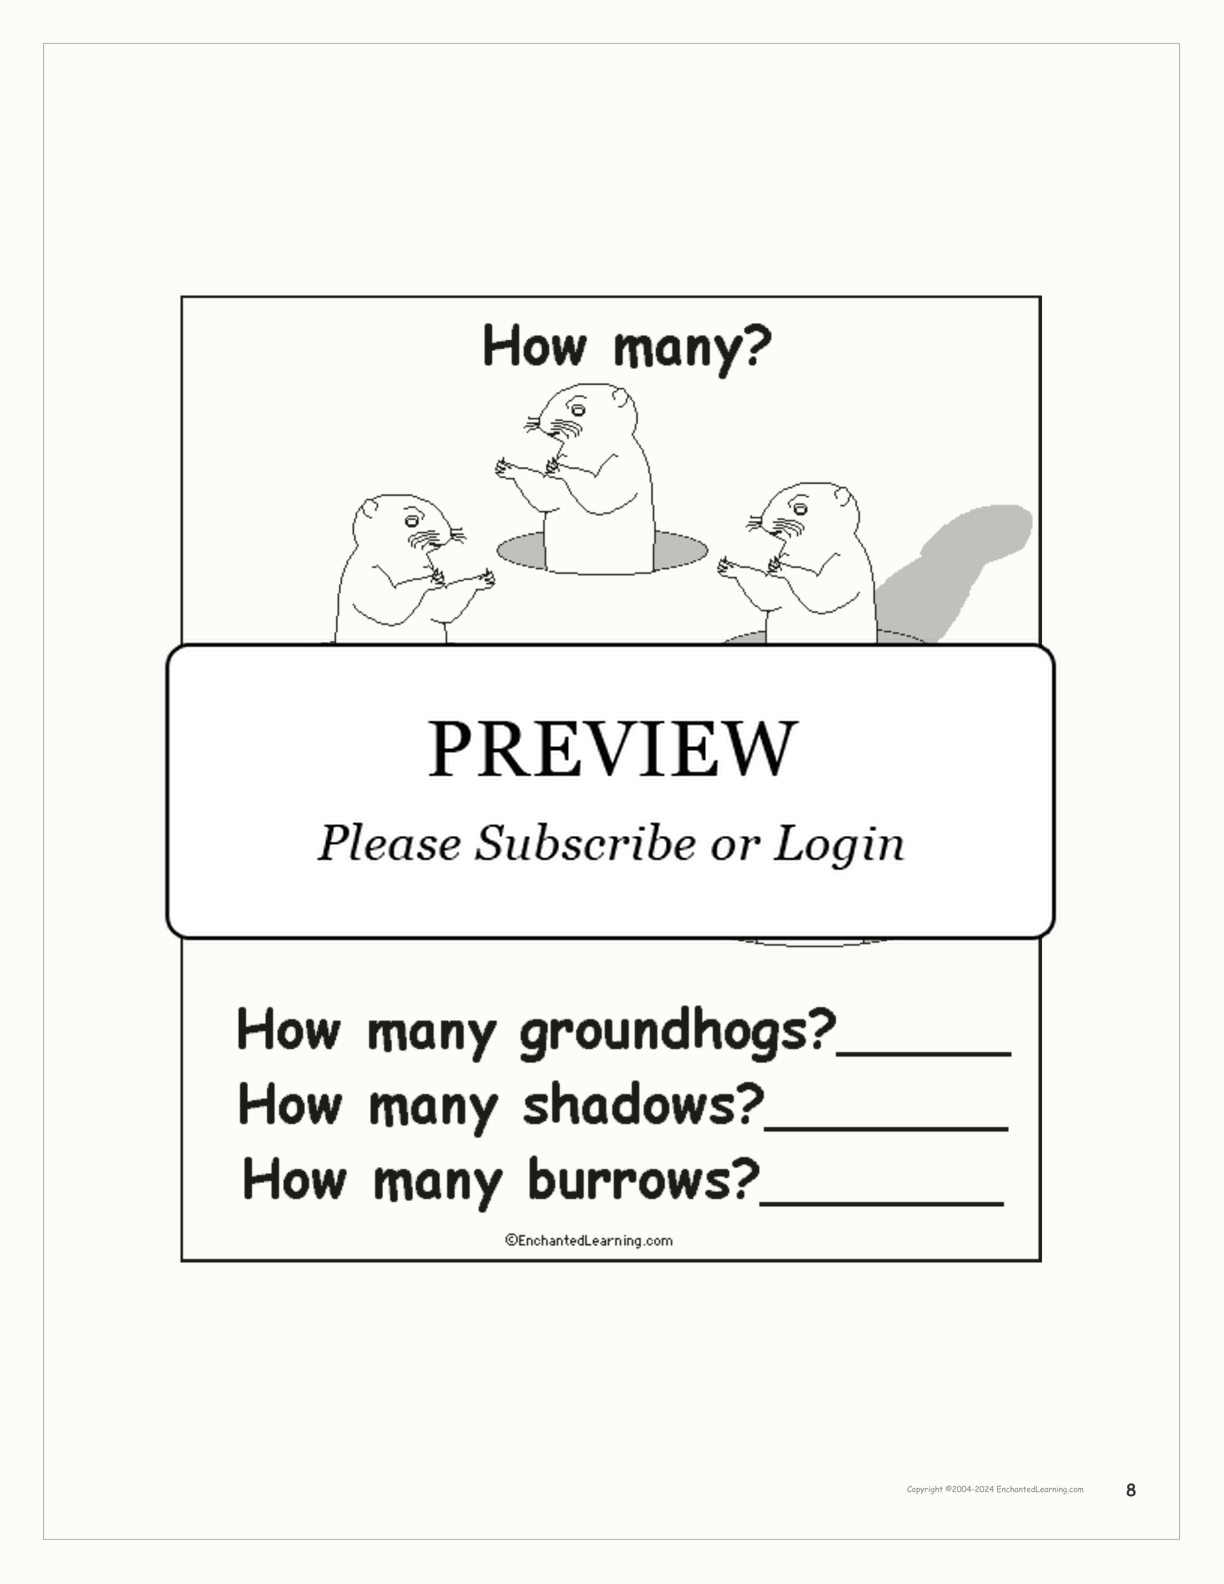 'Groundhog Day: How Many?' interactive worksheet page 8